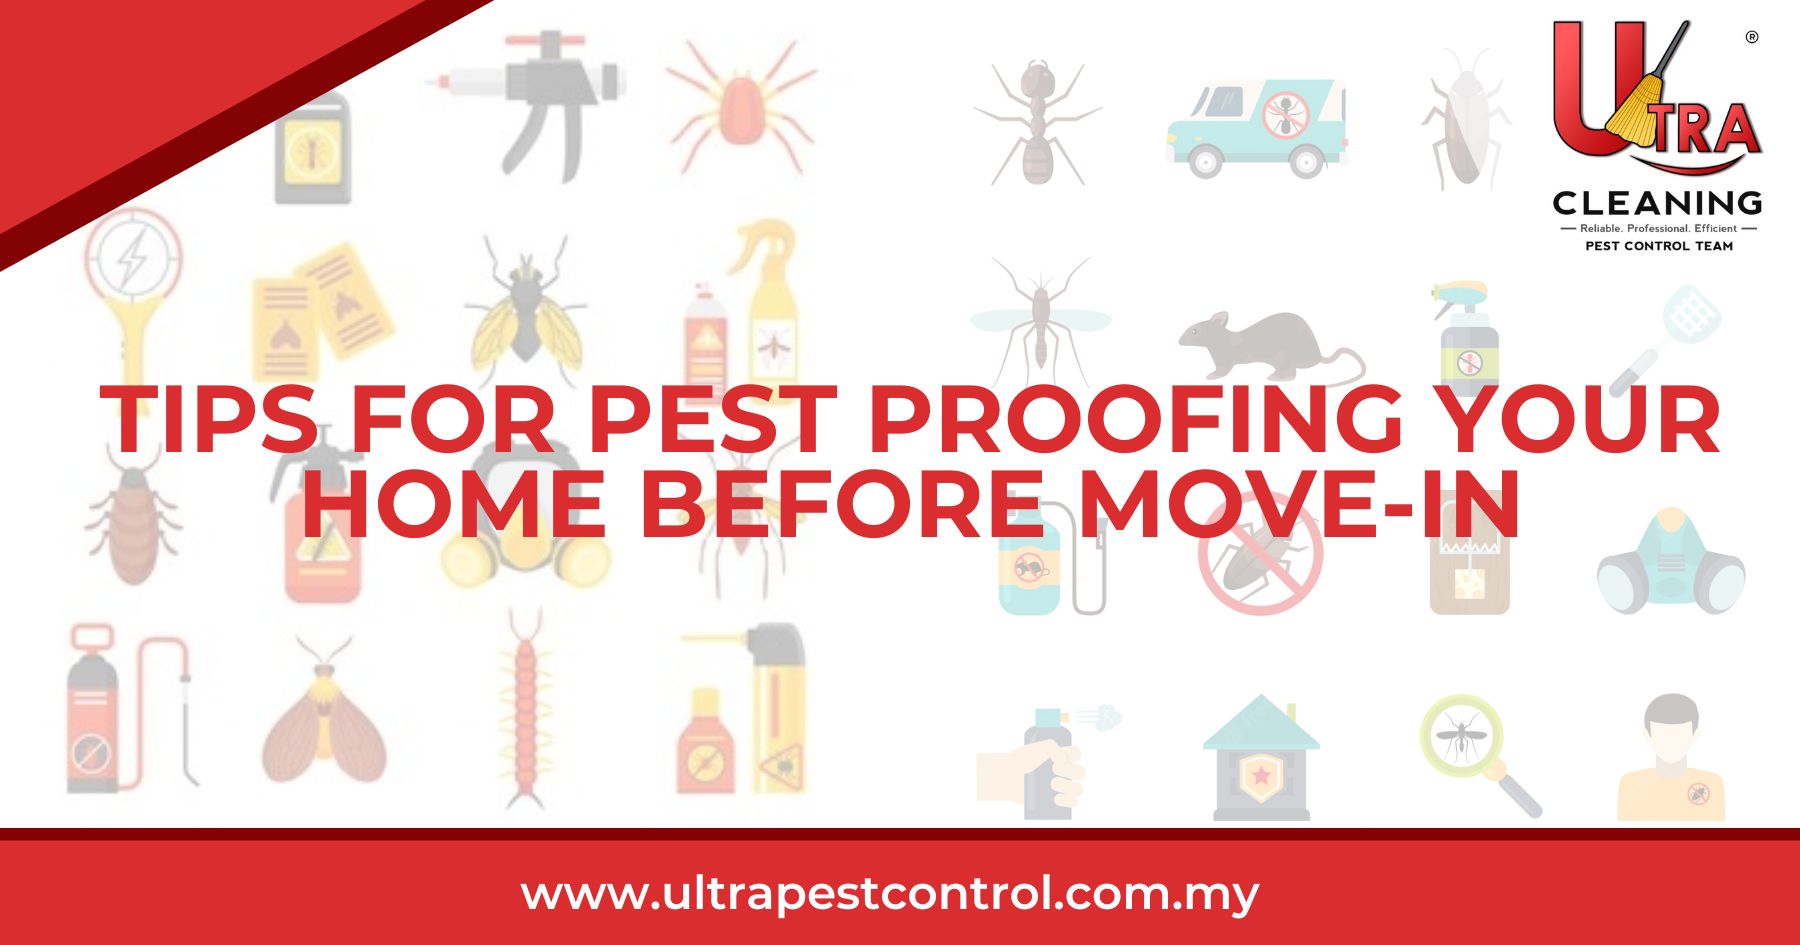 Tips for Pest Proofing Your Home Before Move-In